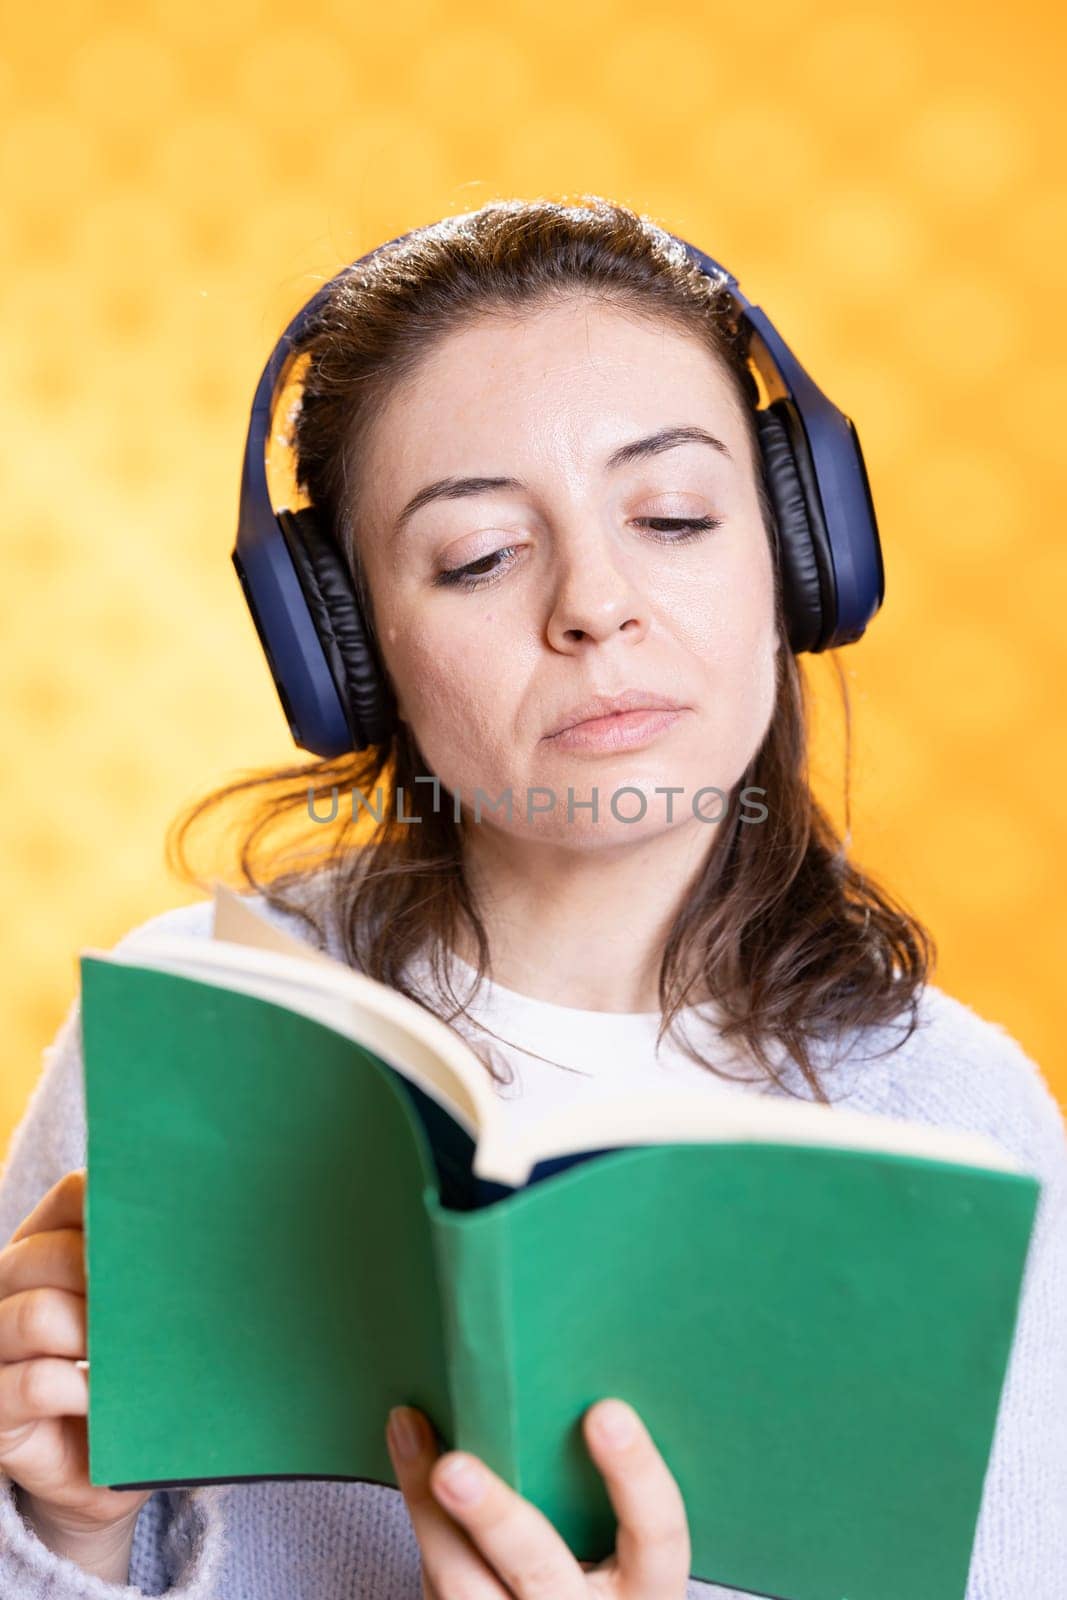 Geek with novel in hand hearing songs through headphones, entertainment concept by DCStudio